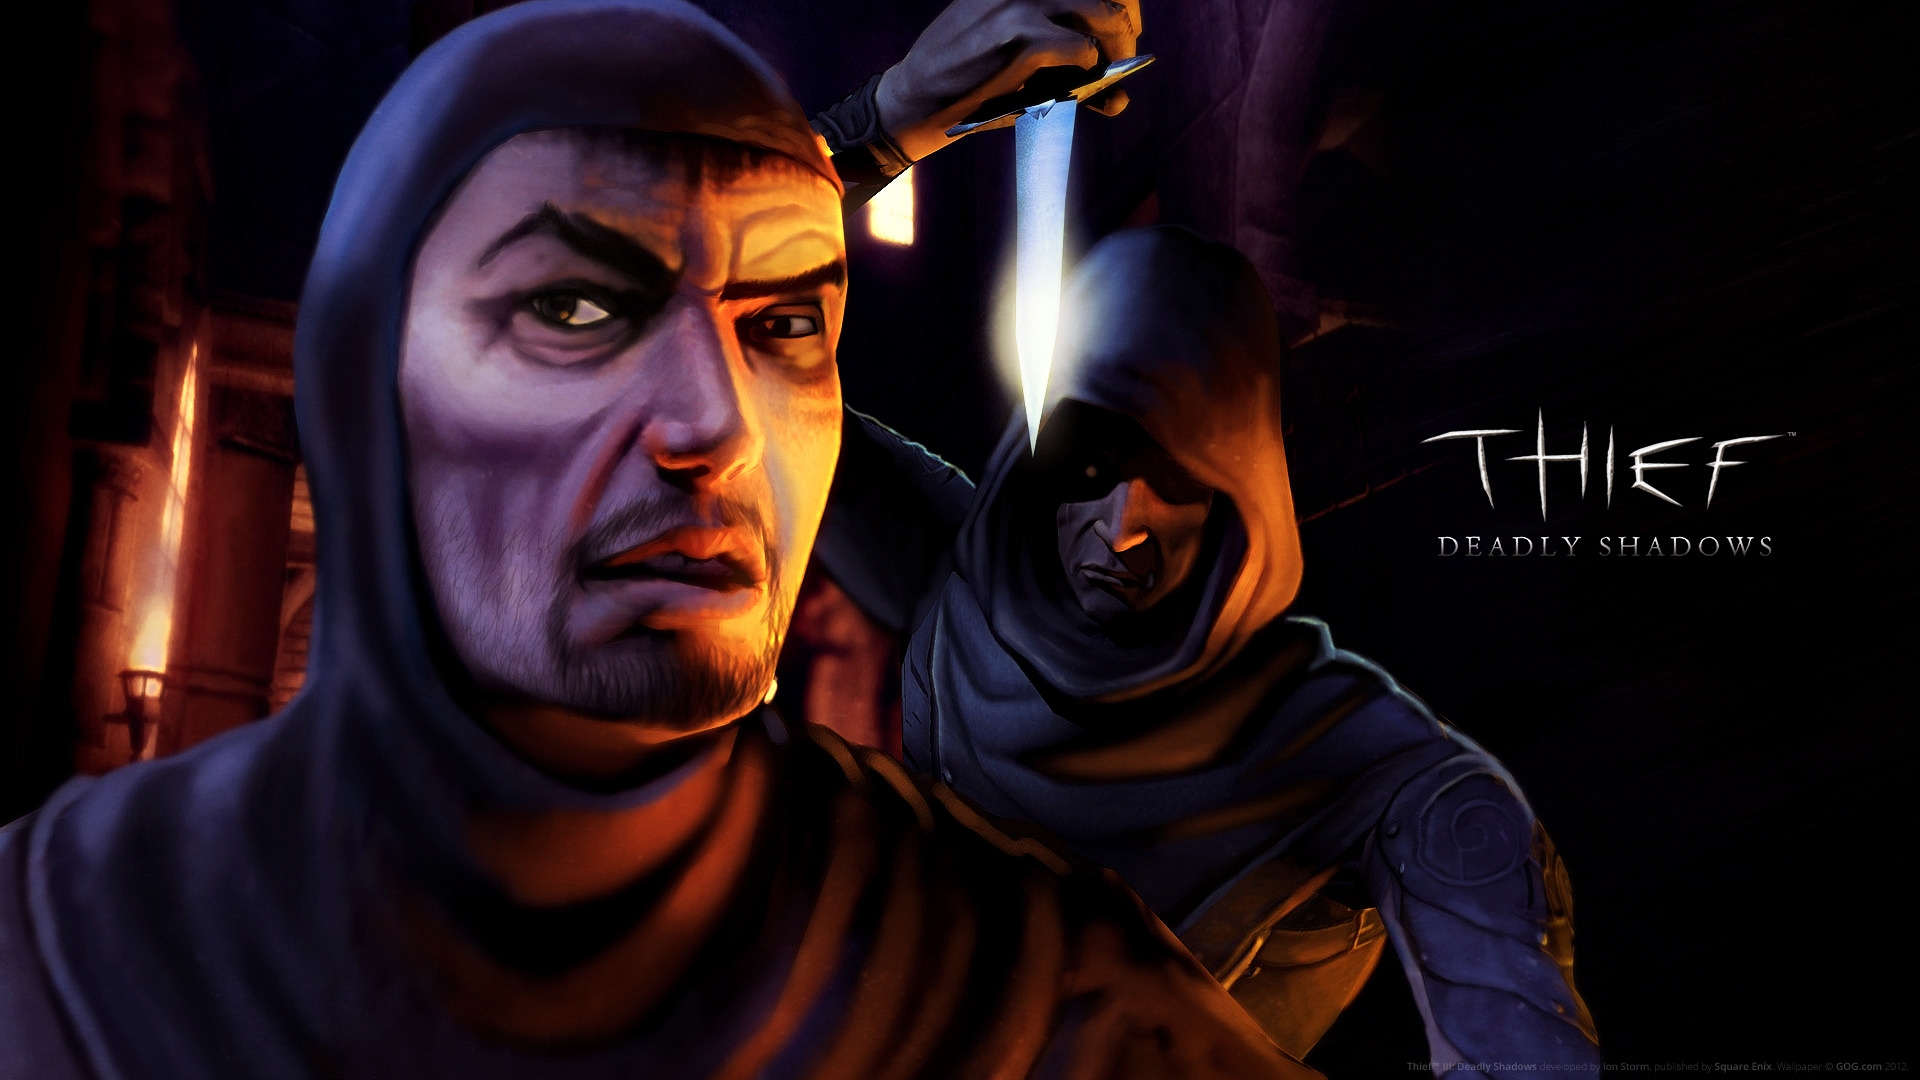 Thief Deadly Shadows for 1920 x 1080 HDTV 1080p resolution